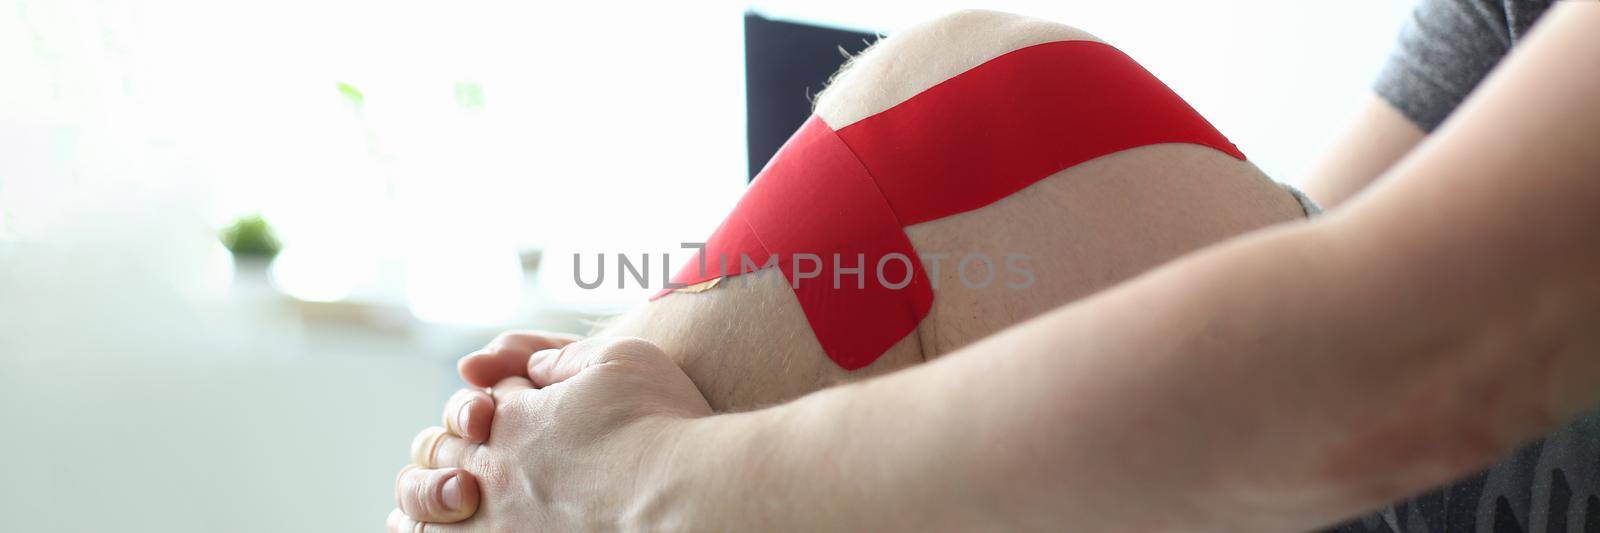 Therapeutic treatment of leg with red physio tape. Stretching knee joint concept